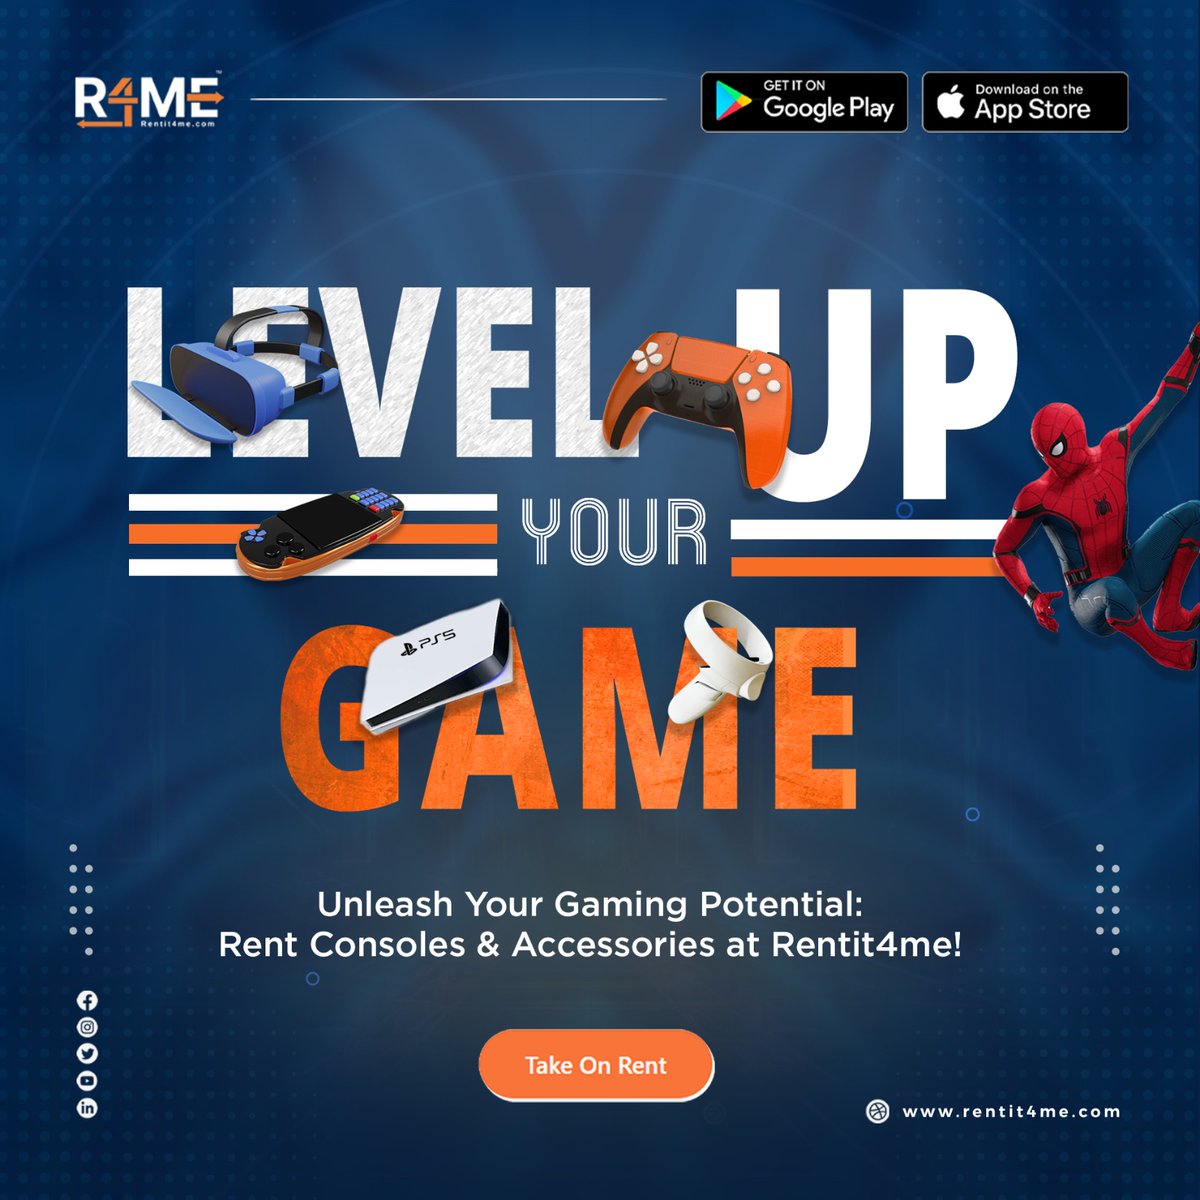 Ready to level up your gaming experience?  Rent a console from Rentit4me and dive into a world of new adventures!

Our website - rentit4me.com

📞 - +91-9319452844

.
.

#rentps4 #gamingconsole #gamingconsolerental #gamerent #videogames #rentgames #consolerental